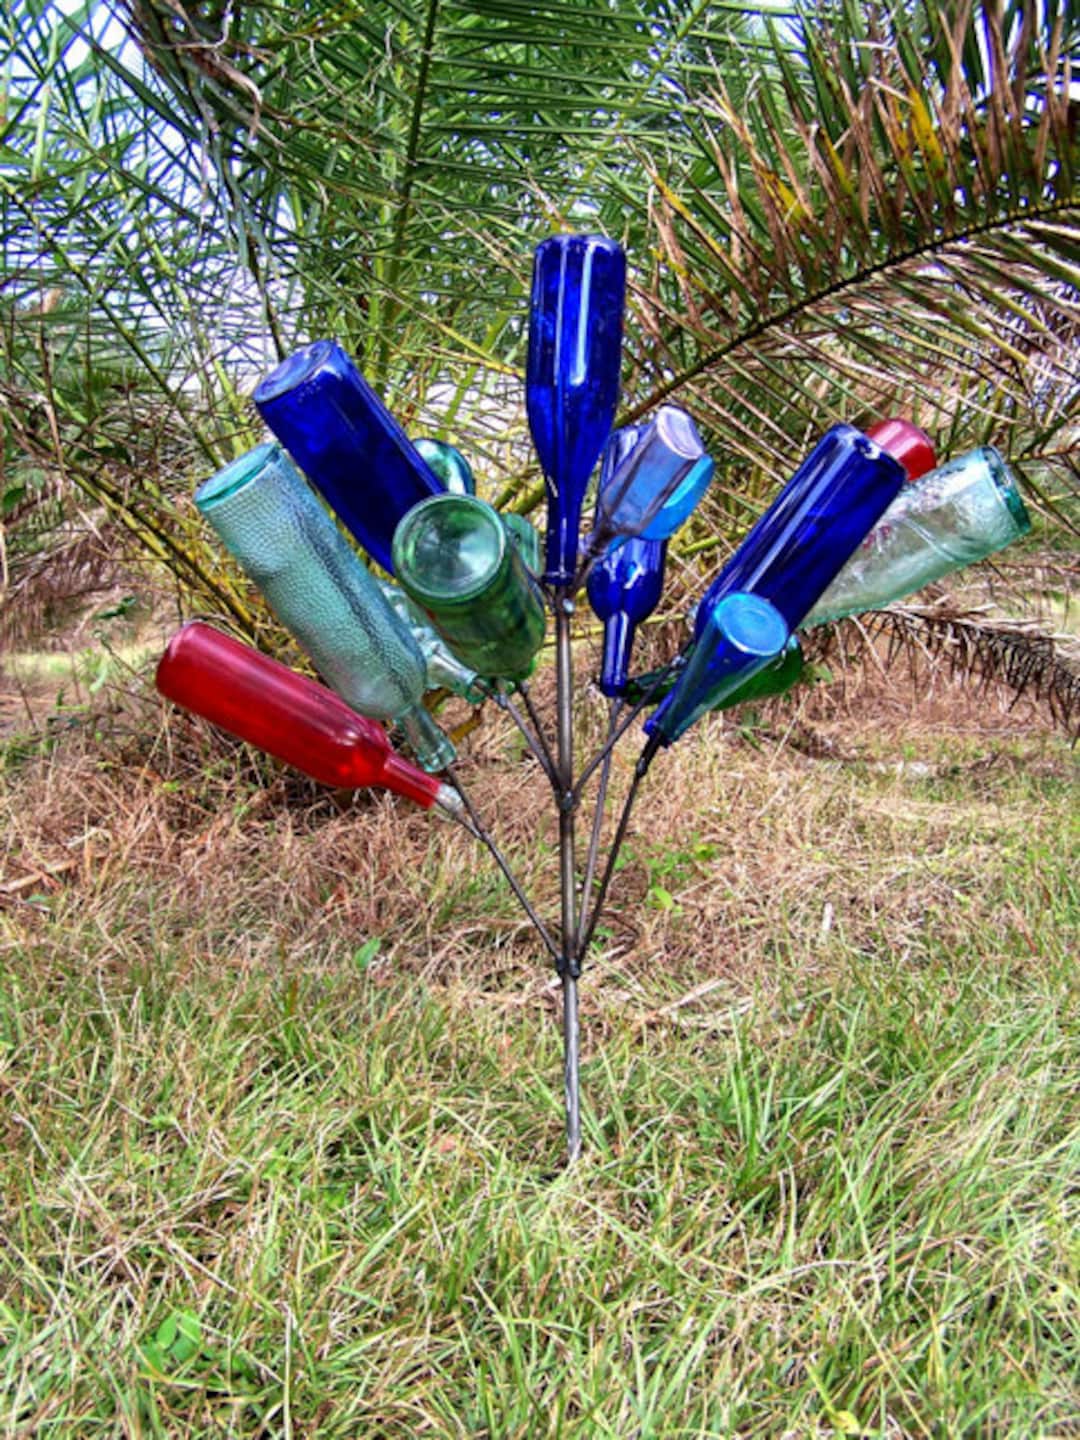 The Southern Pine Bottle Tree